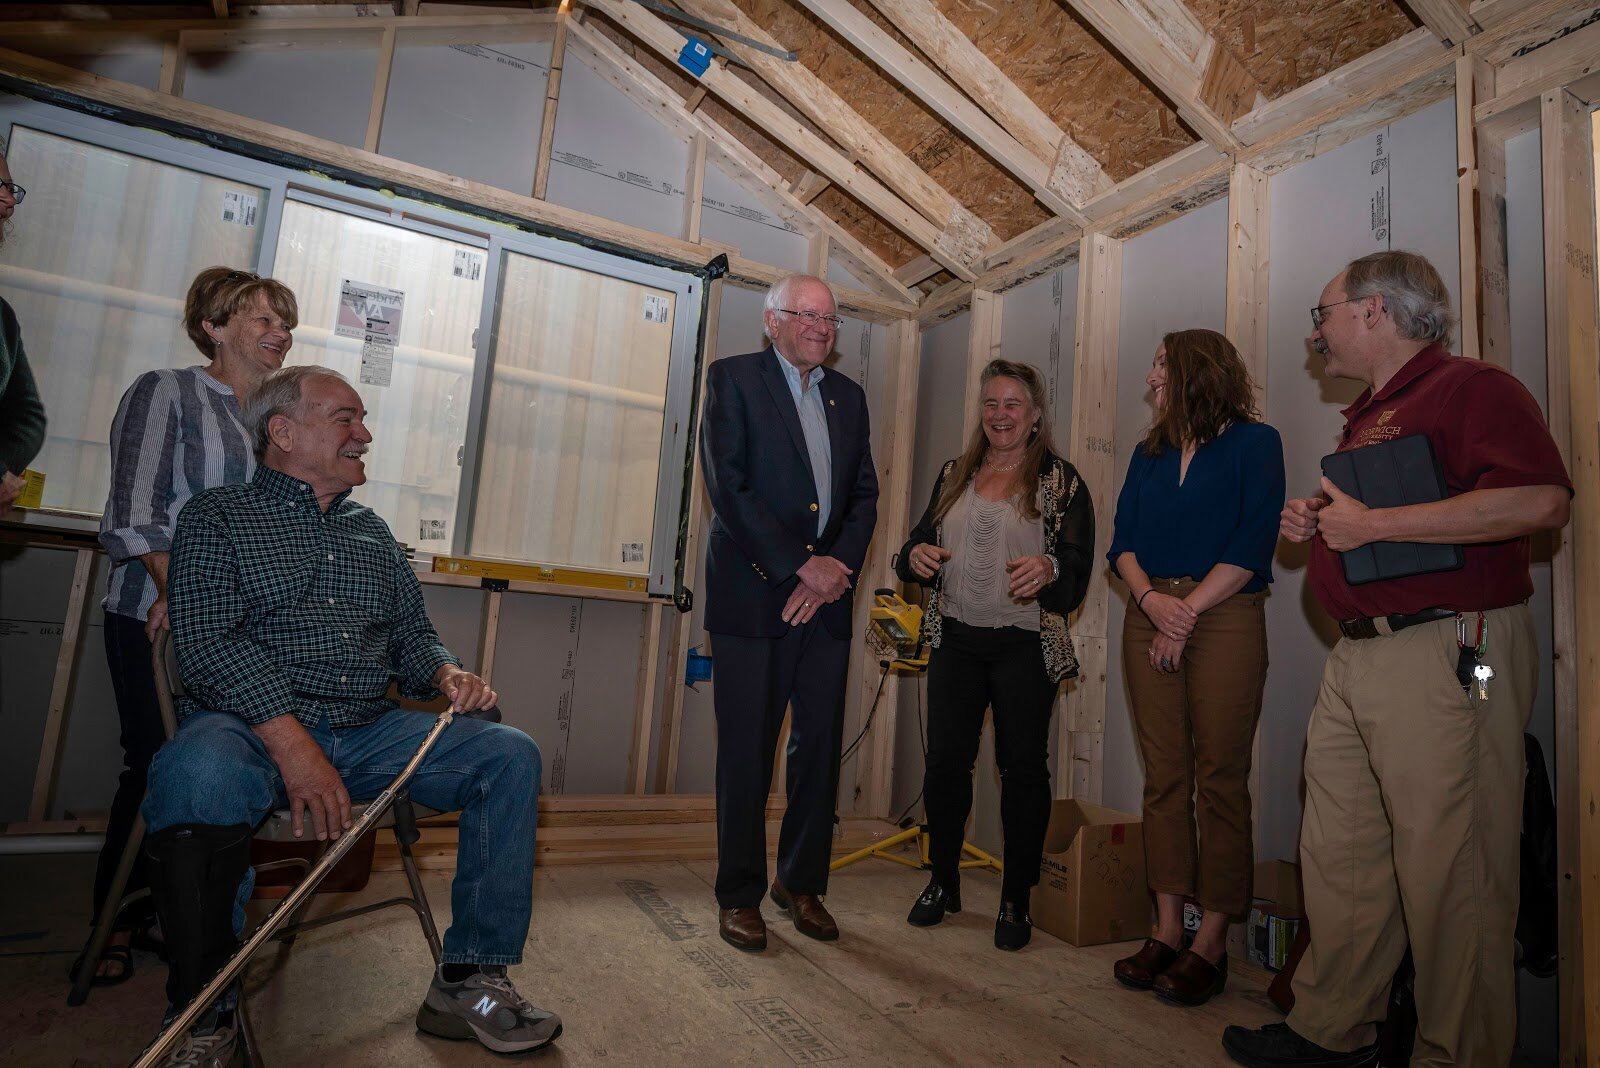 Senator Bernie Sanders met with Anna and Edmond Little, Wheel Pad team members Julie Lineberger and Jessie Couture, Professor Edwin Schmeckpeper. Senator Sanders was instrumental in the process for Wheel Pad to become a Veterans Administration appro…